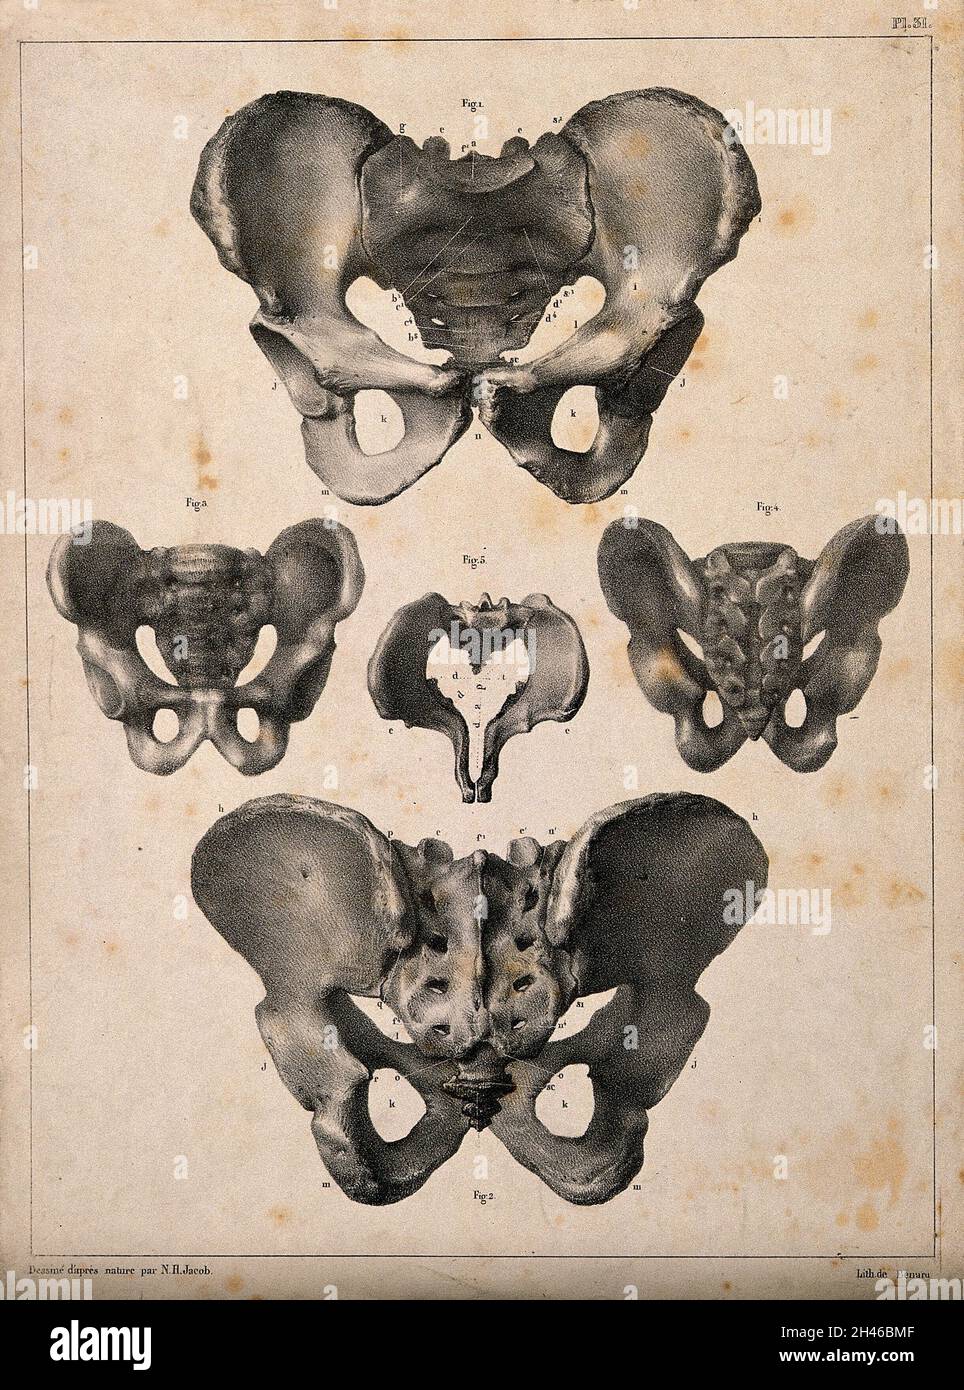 The pelvis: five figures. Lithograph by N.H Jacob, 1831/1854. Stock Photo